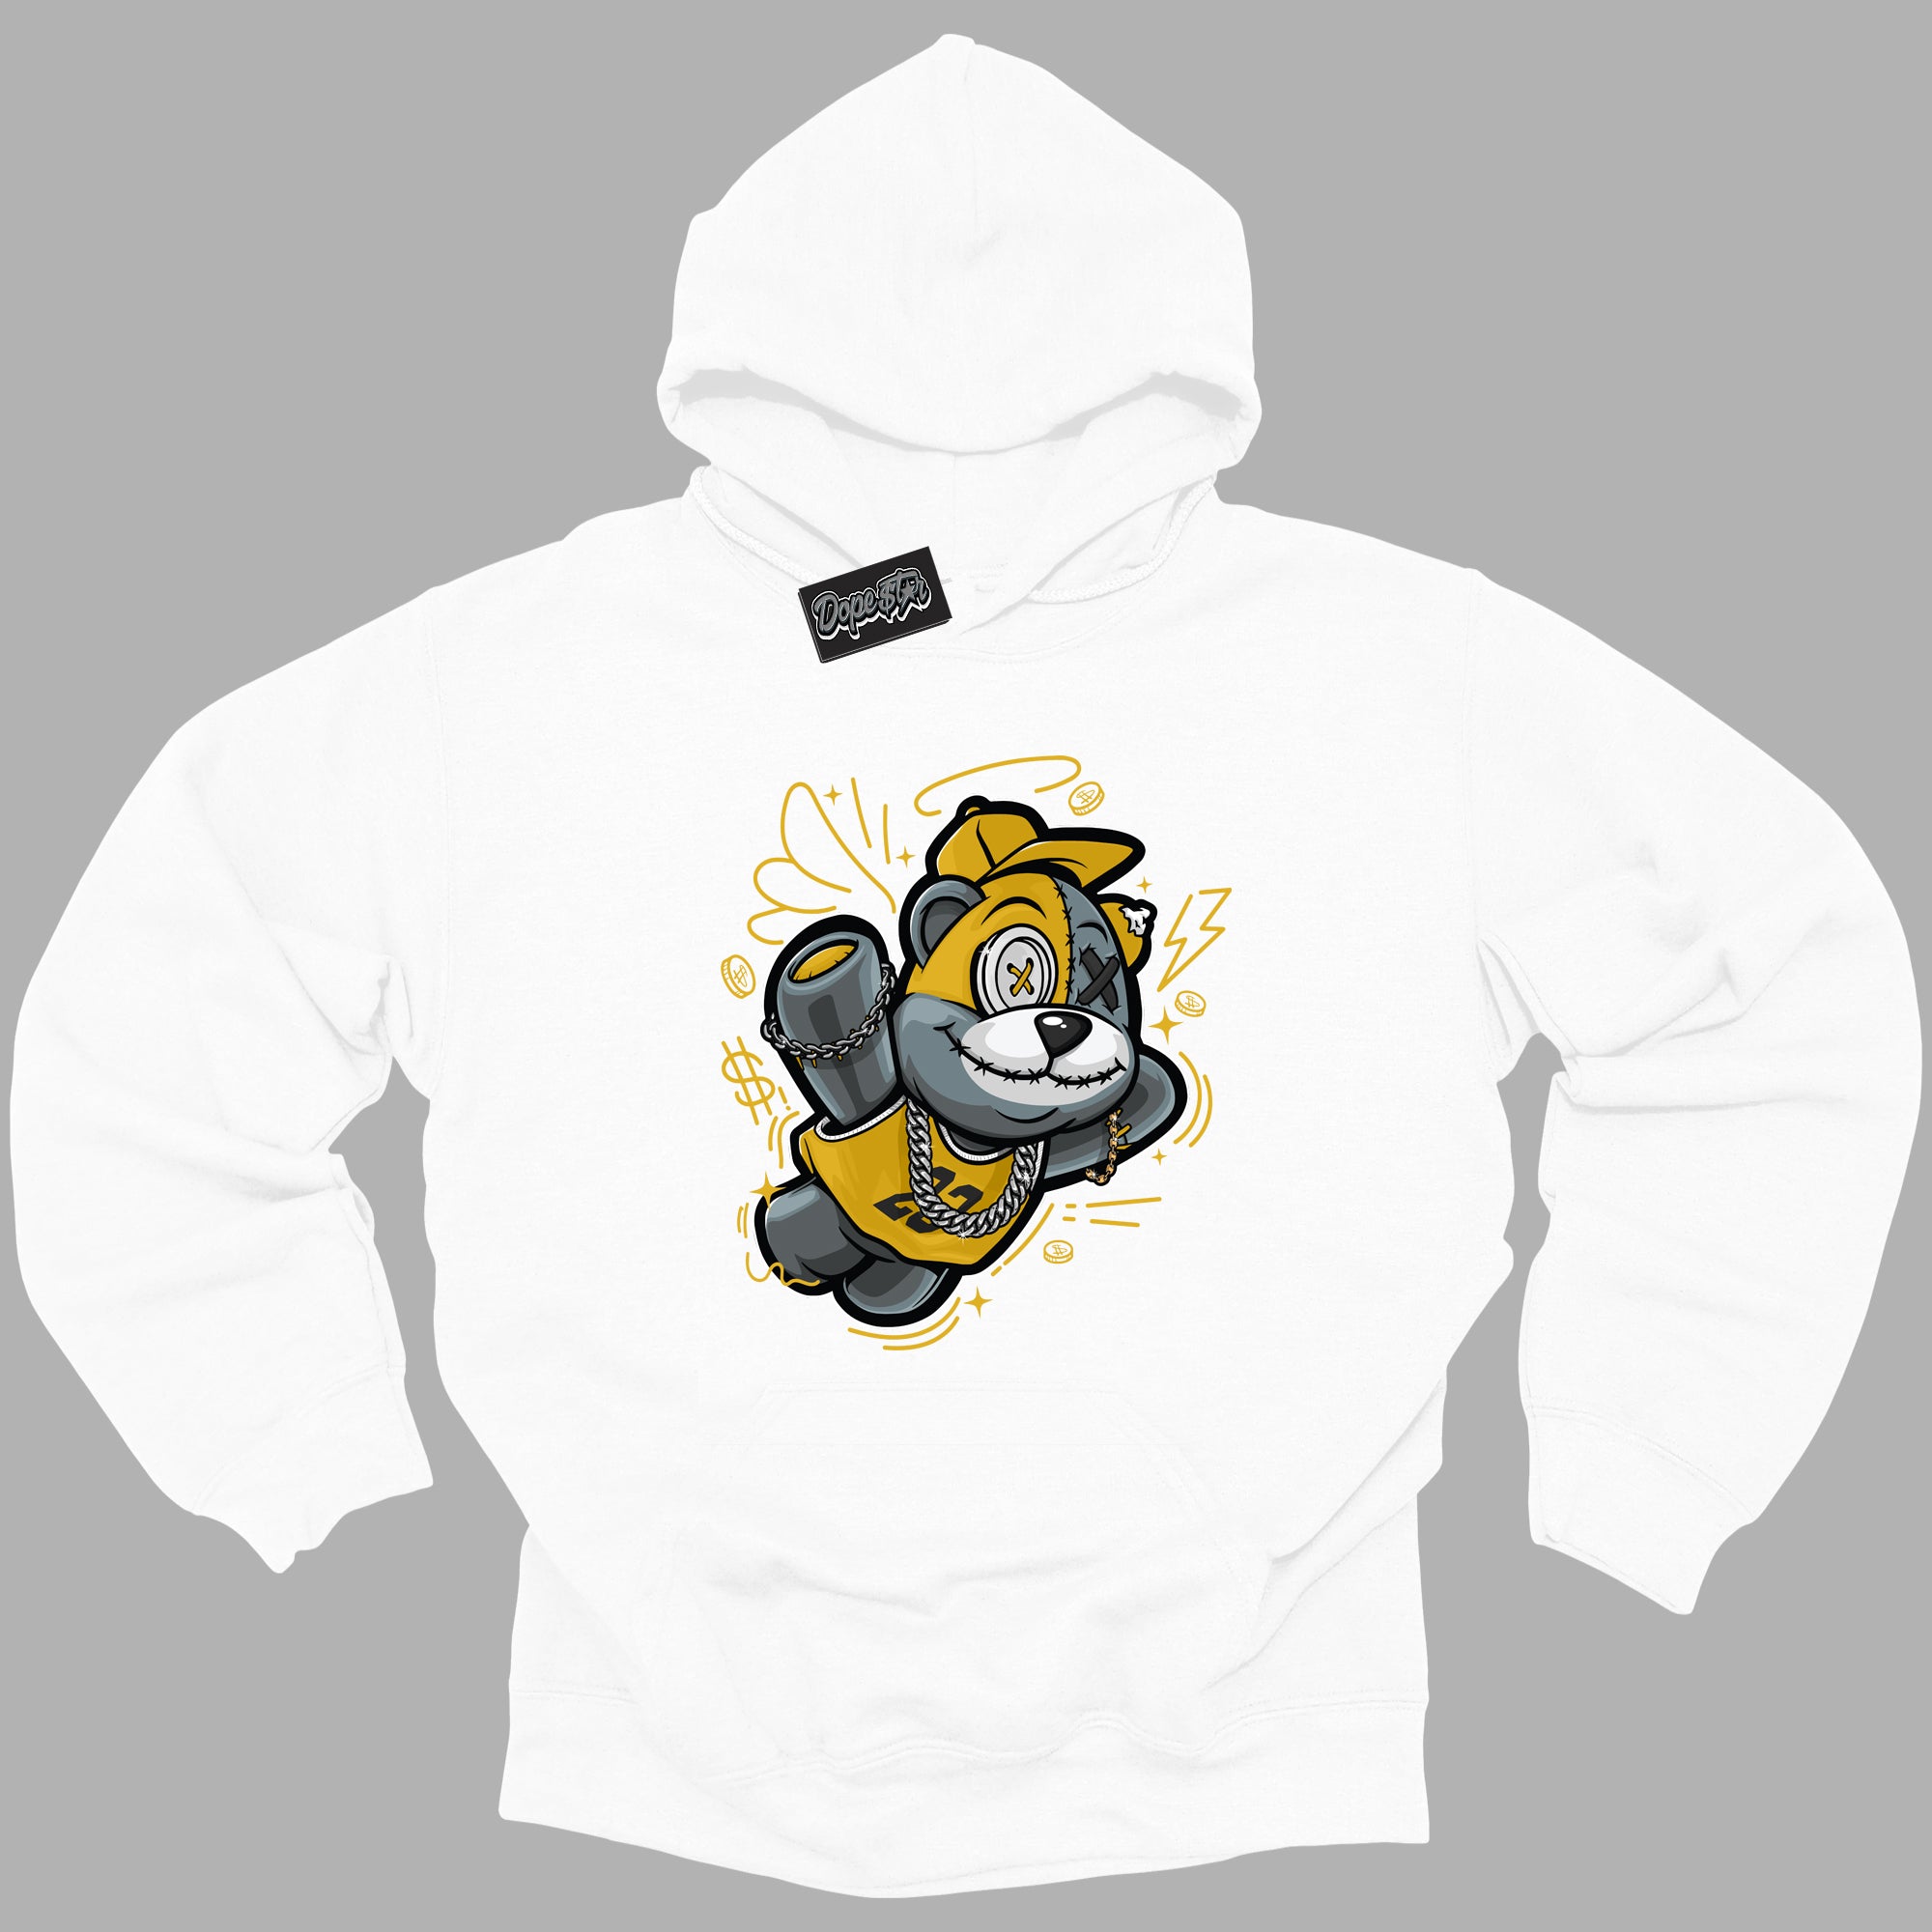 Cool White Hoodie with “ Slam Dunk Bear ”  design that Perfectly Matches Yellow Ochre 6s Sneakers.